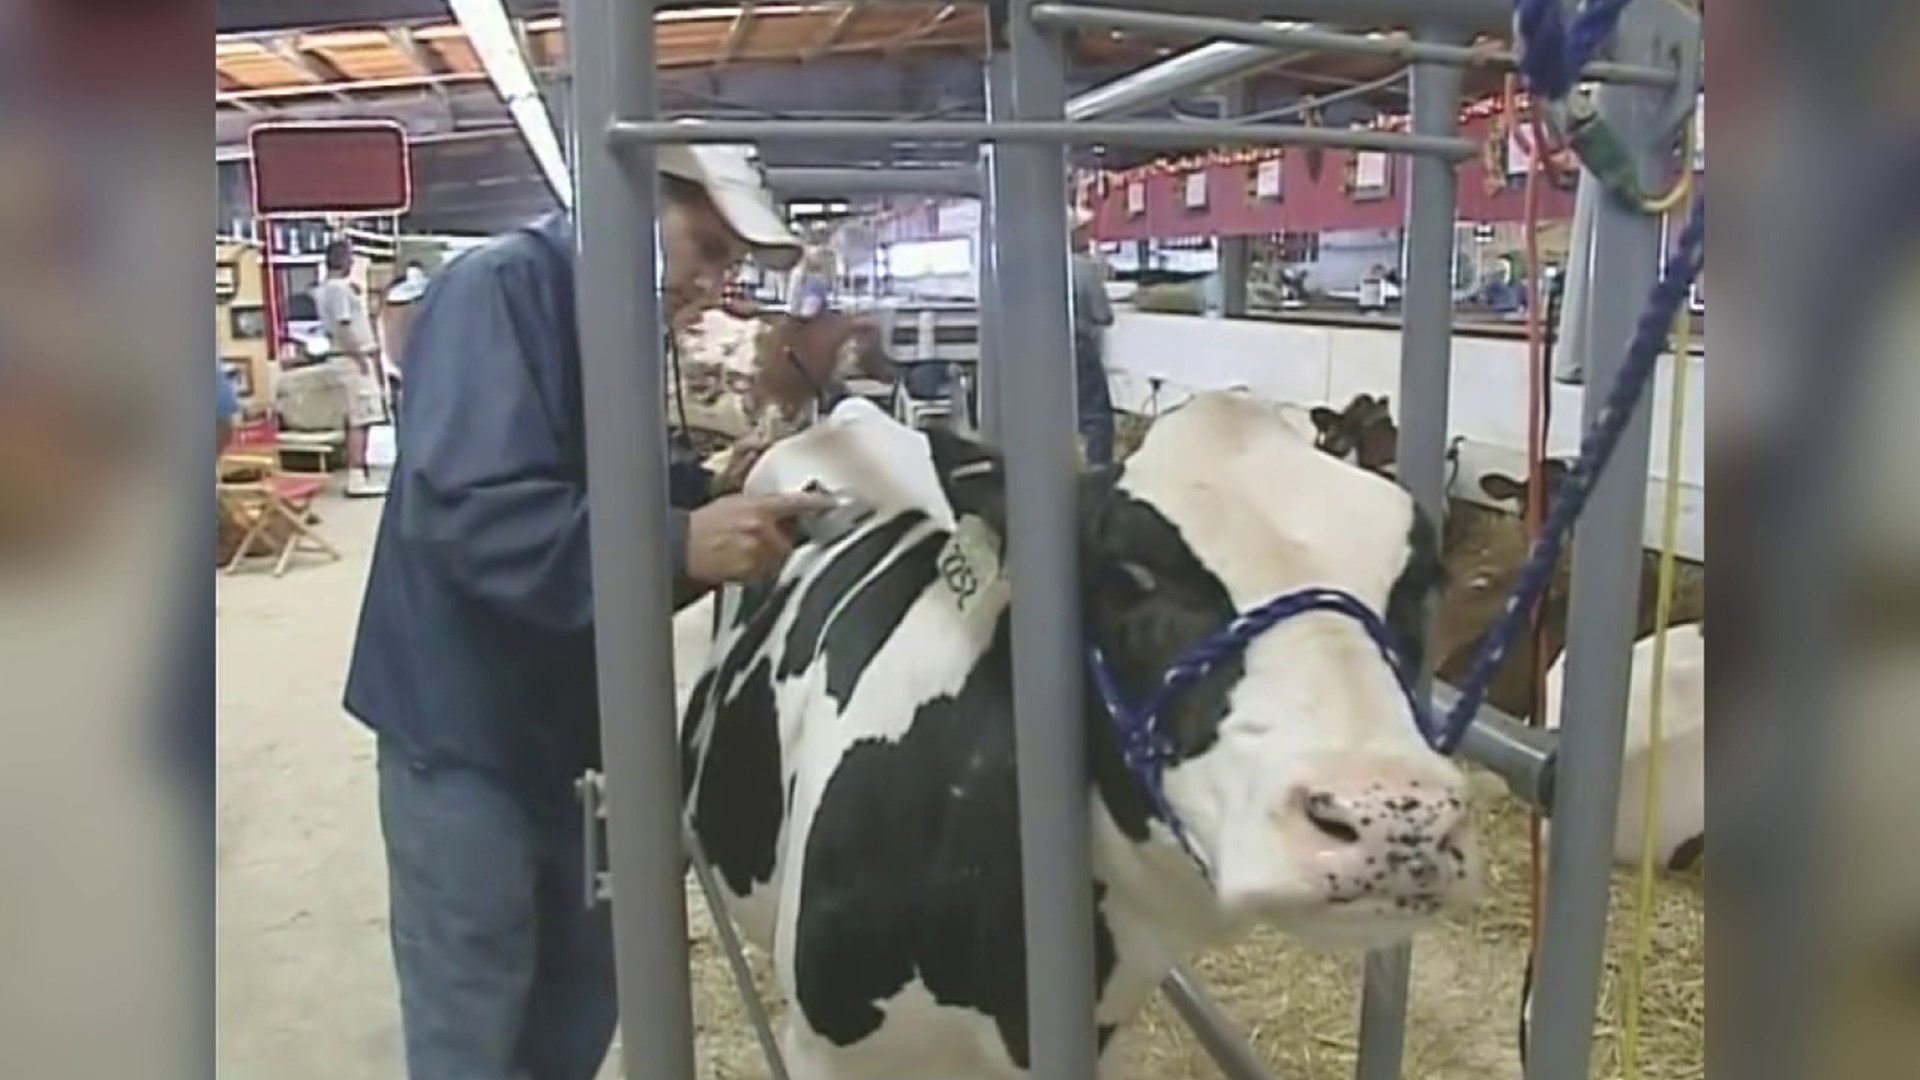 Mike Stevens takes us back to a memory of the Bloomsburg Fair from 2008.